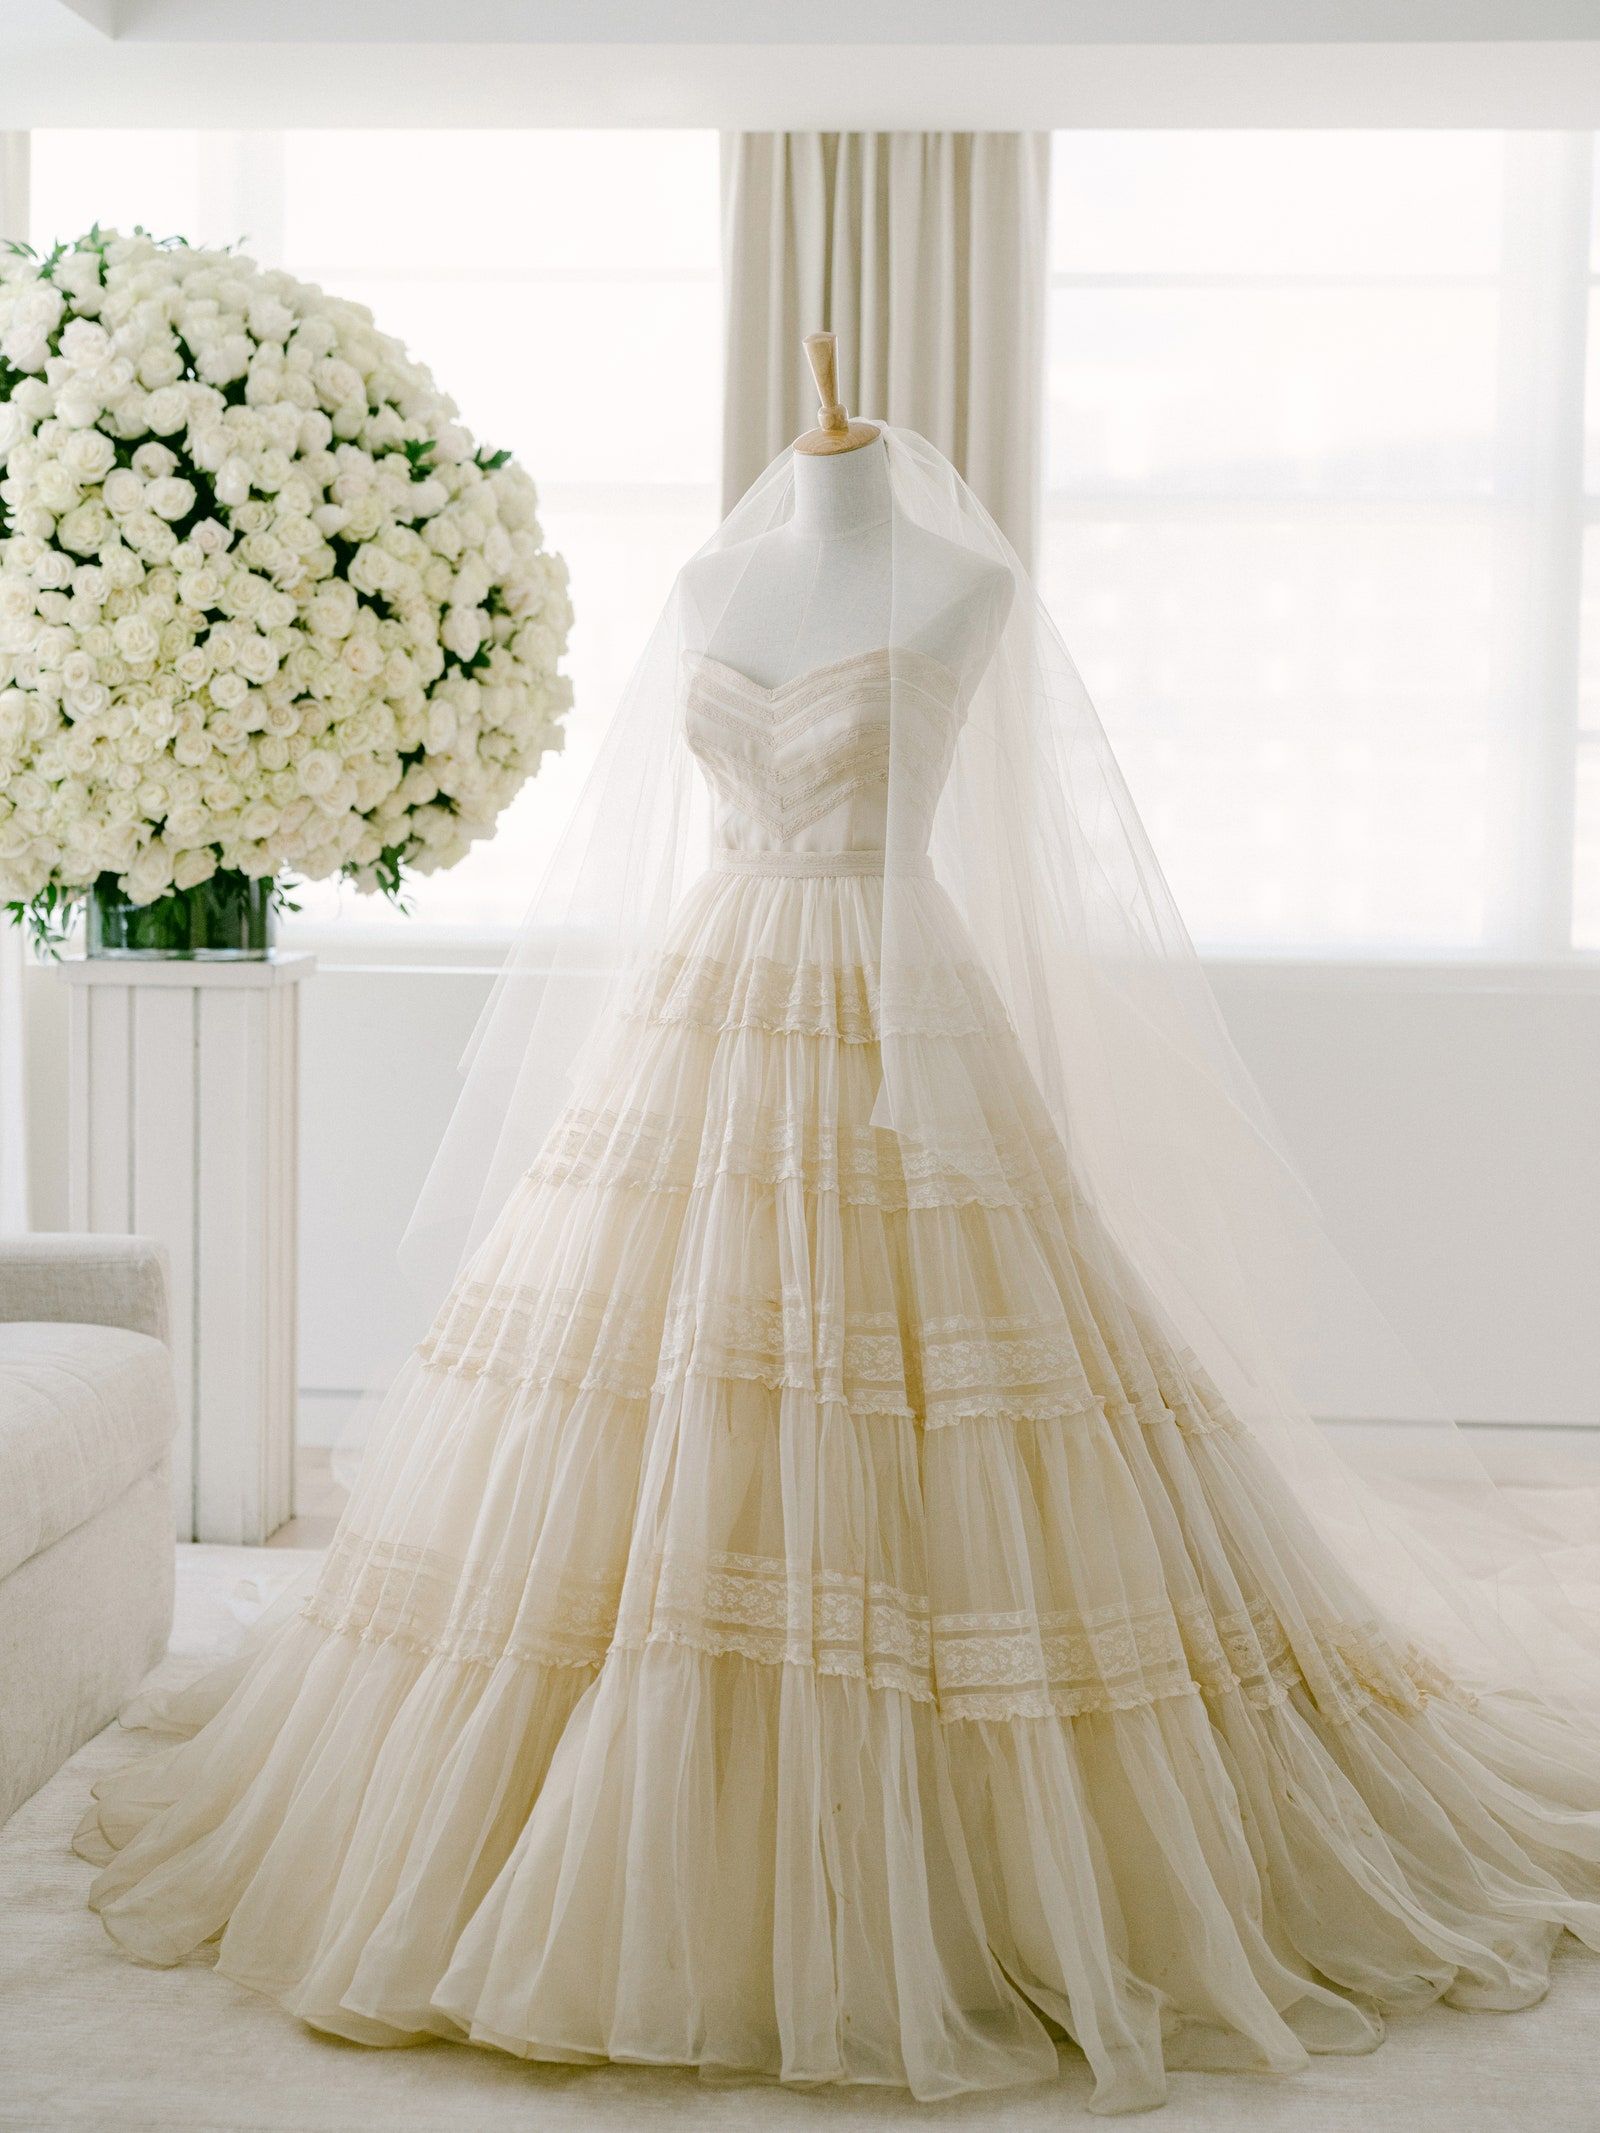 The Complete Guide to Preserving Your Wedding Dress for Future Generat -  Wedding Dress Preservation